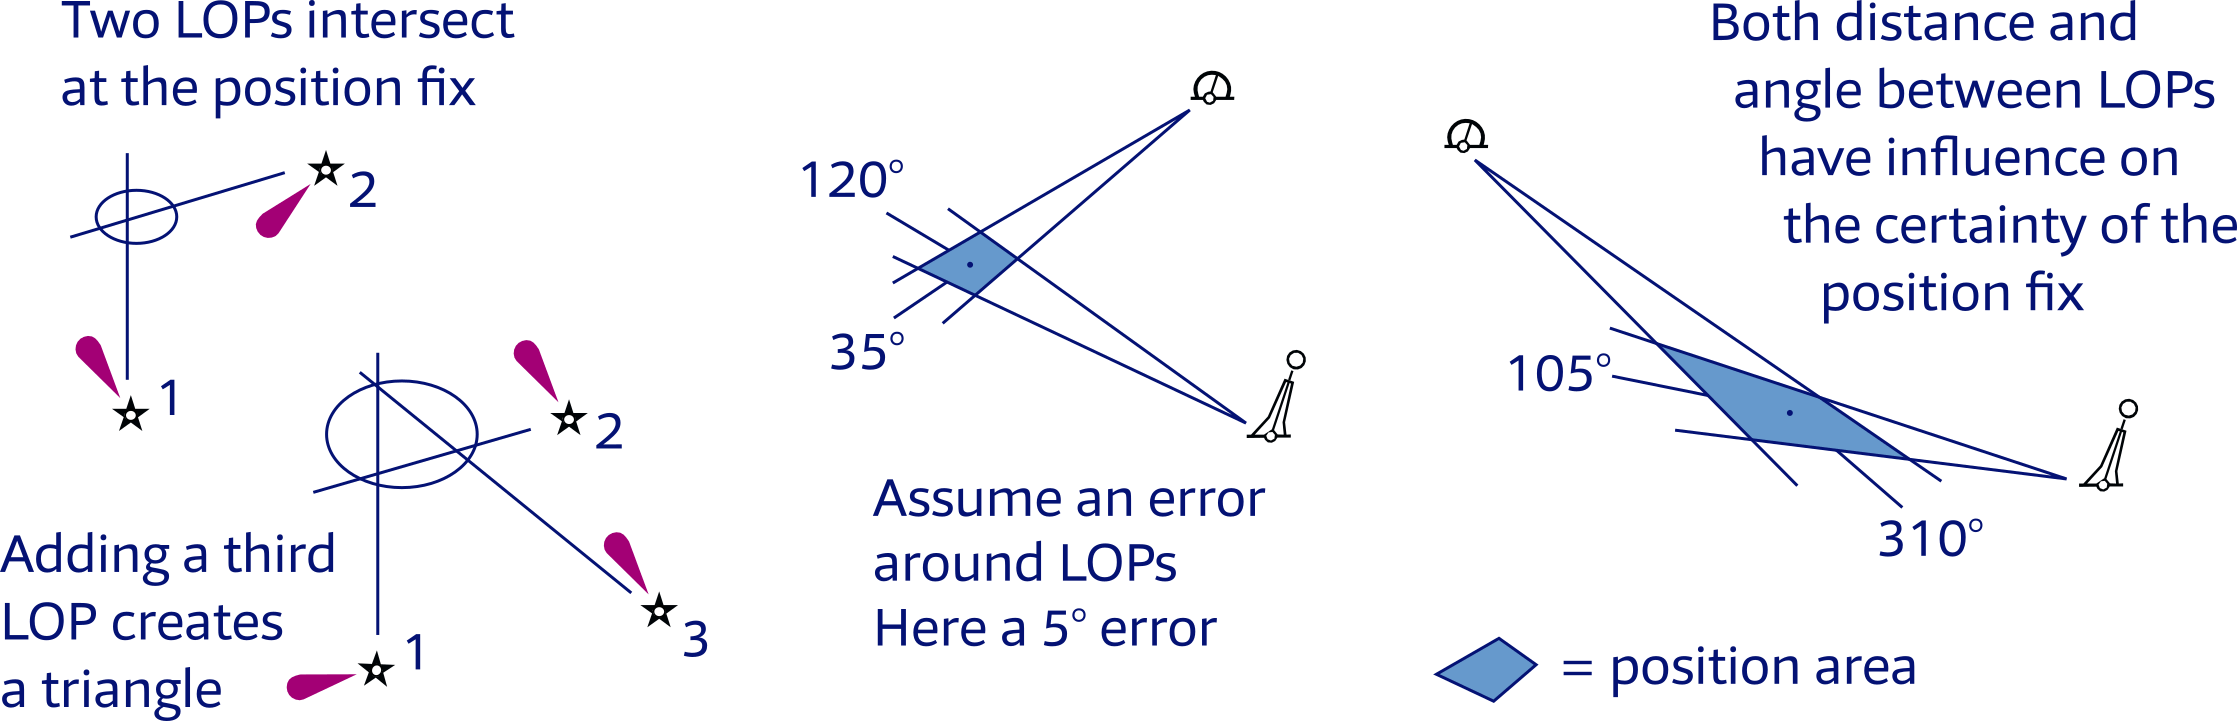 Position fix errors and LOPs explained